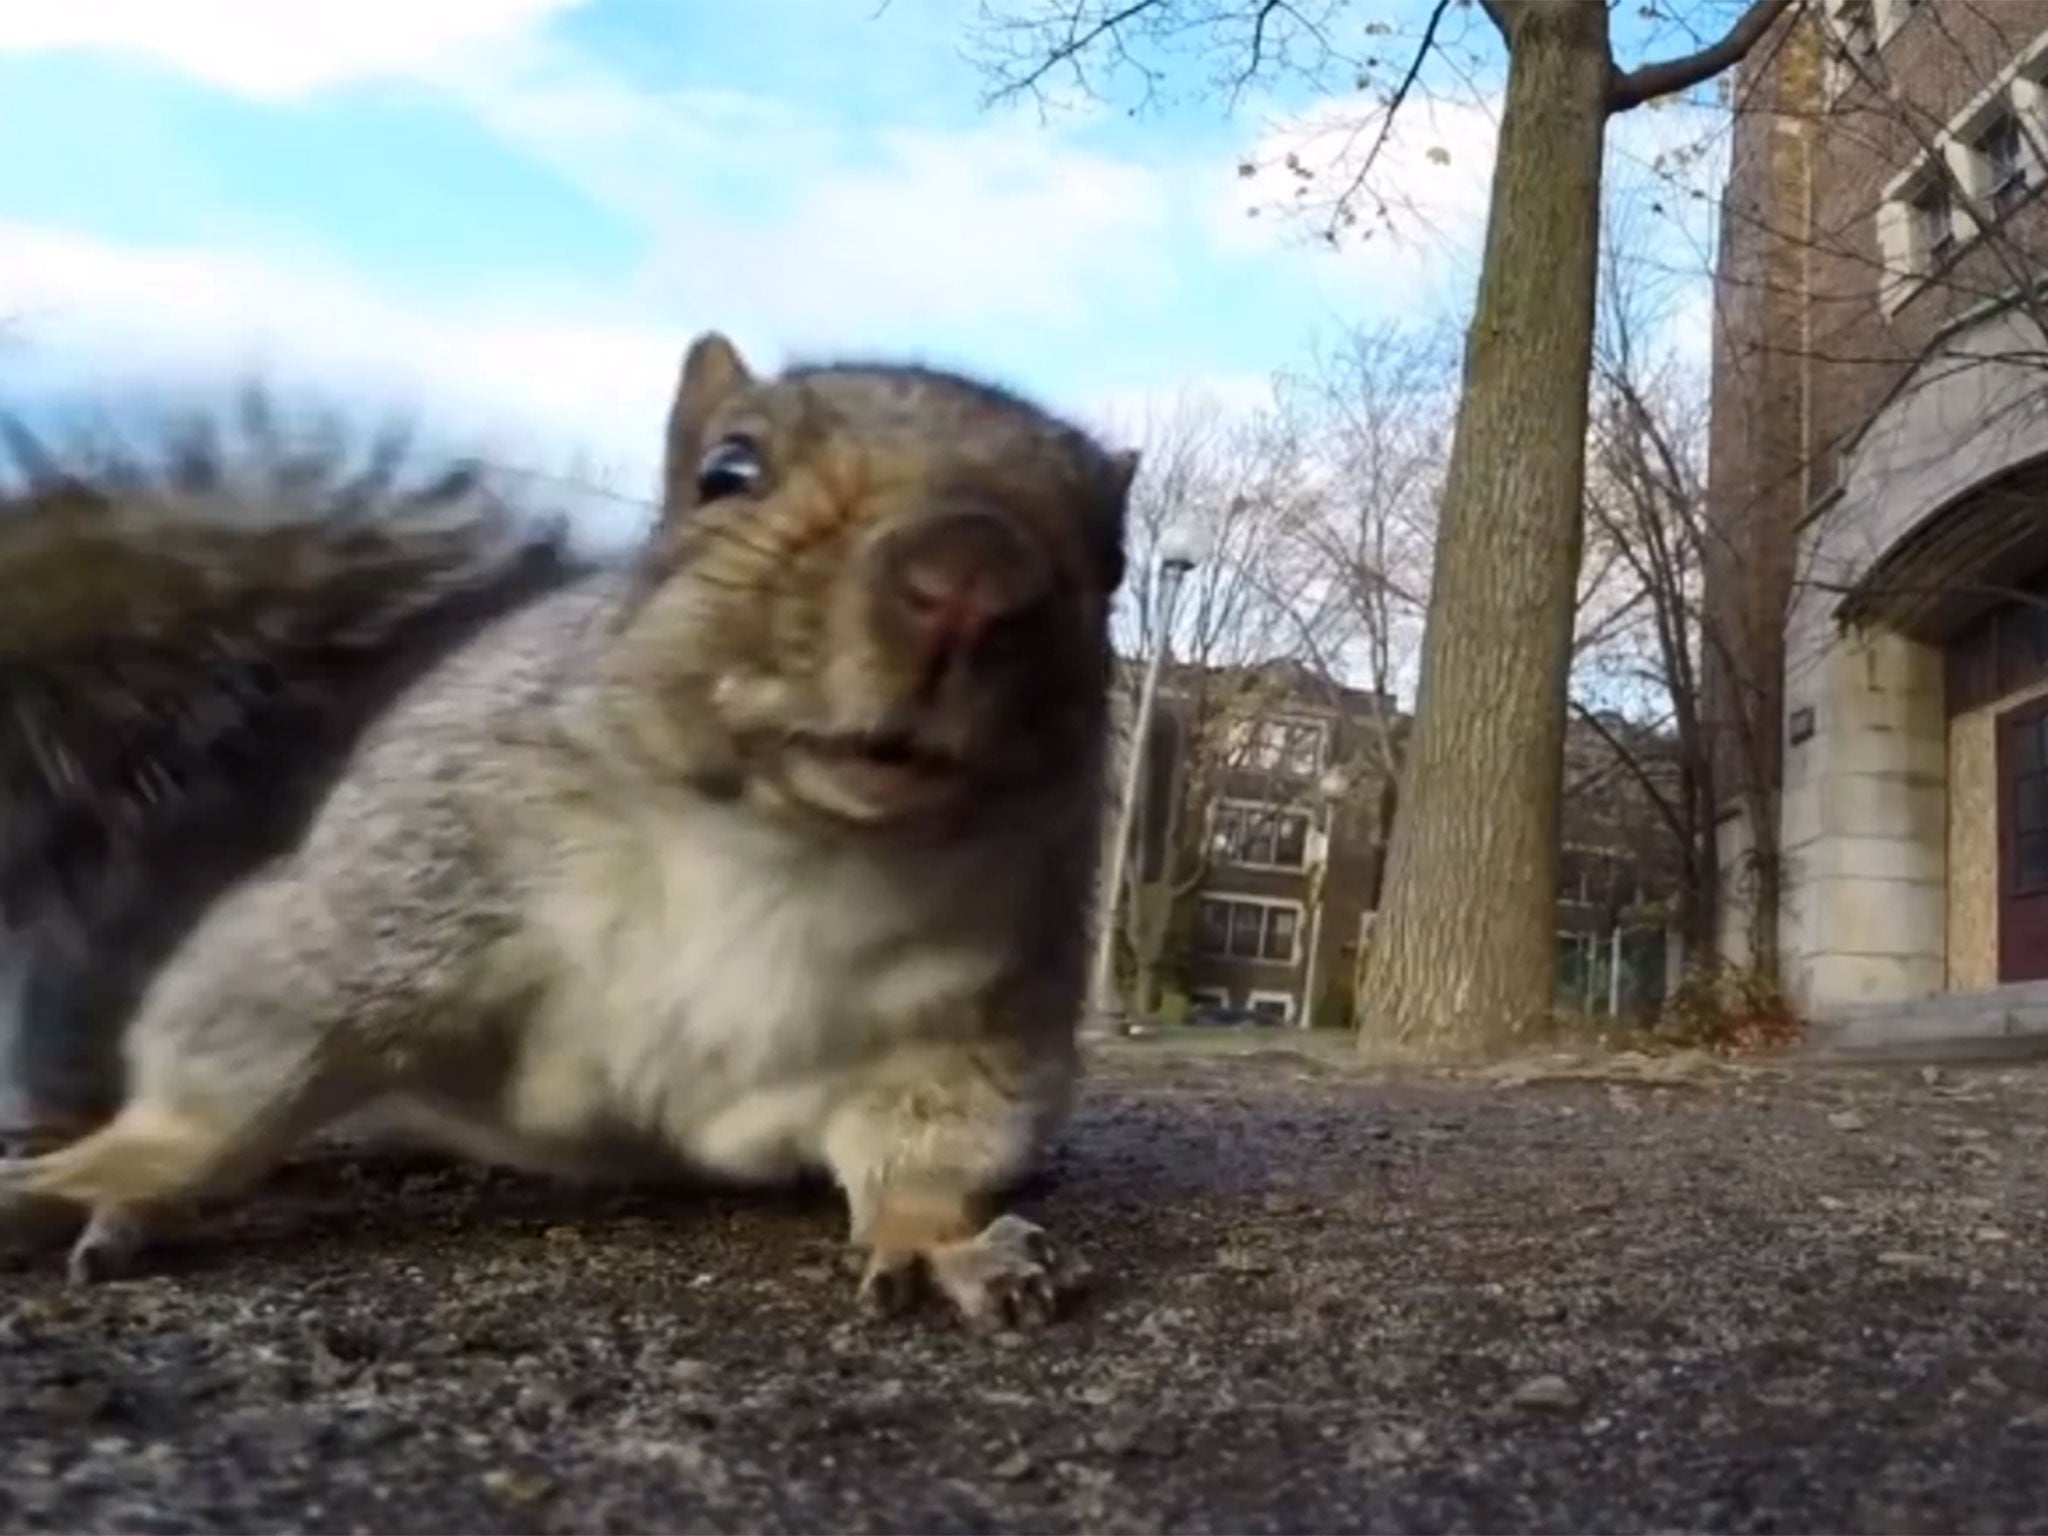 The squirrel carried the GoPro up a tree before dropping it